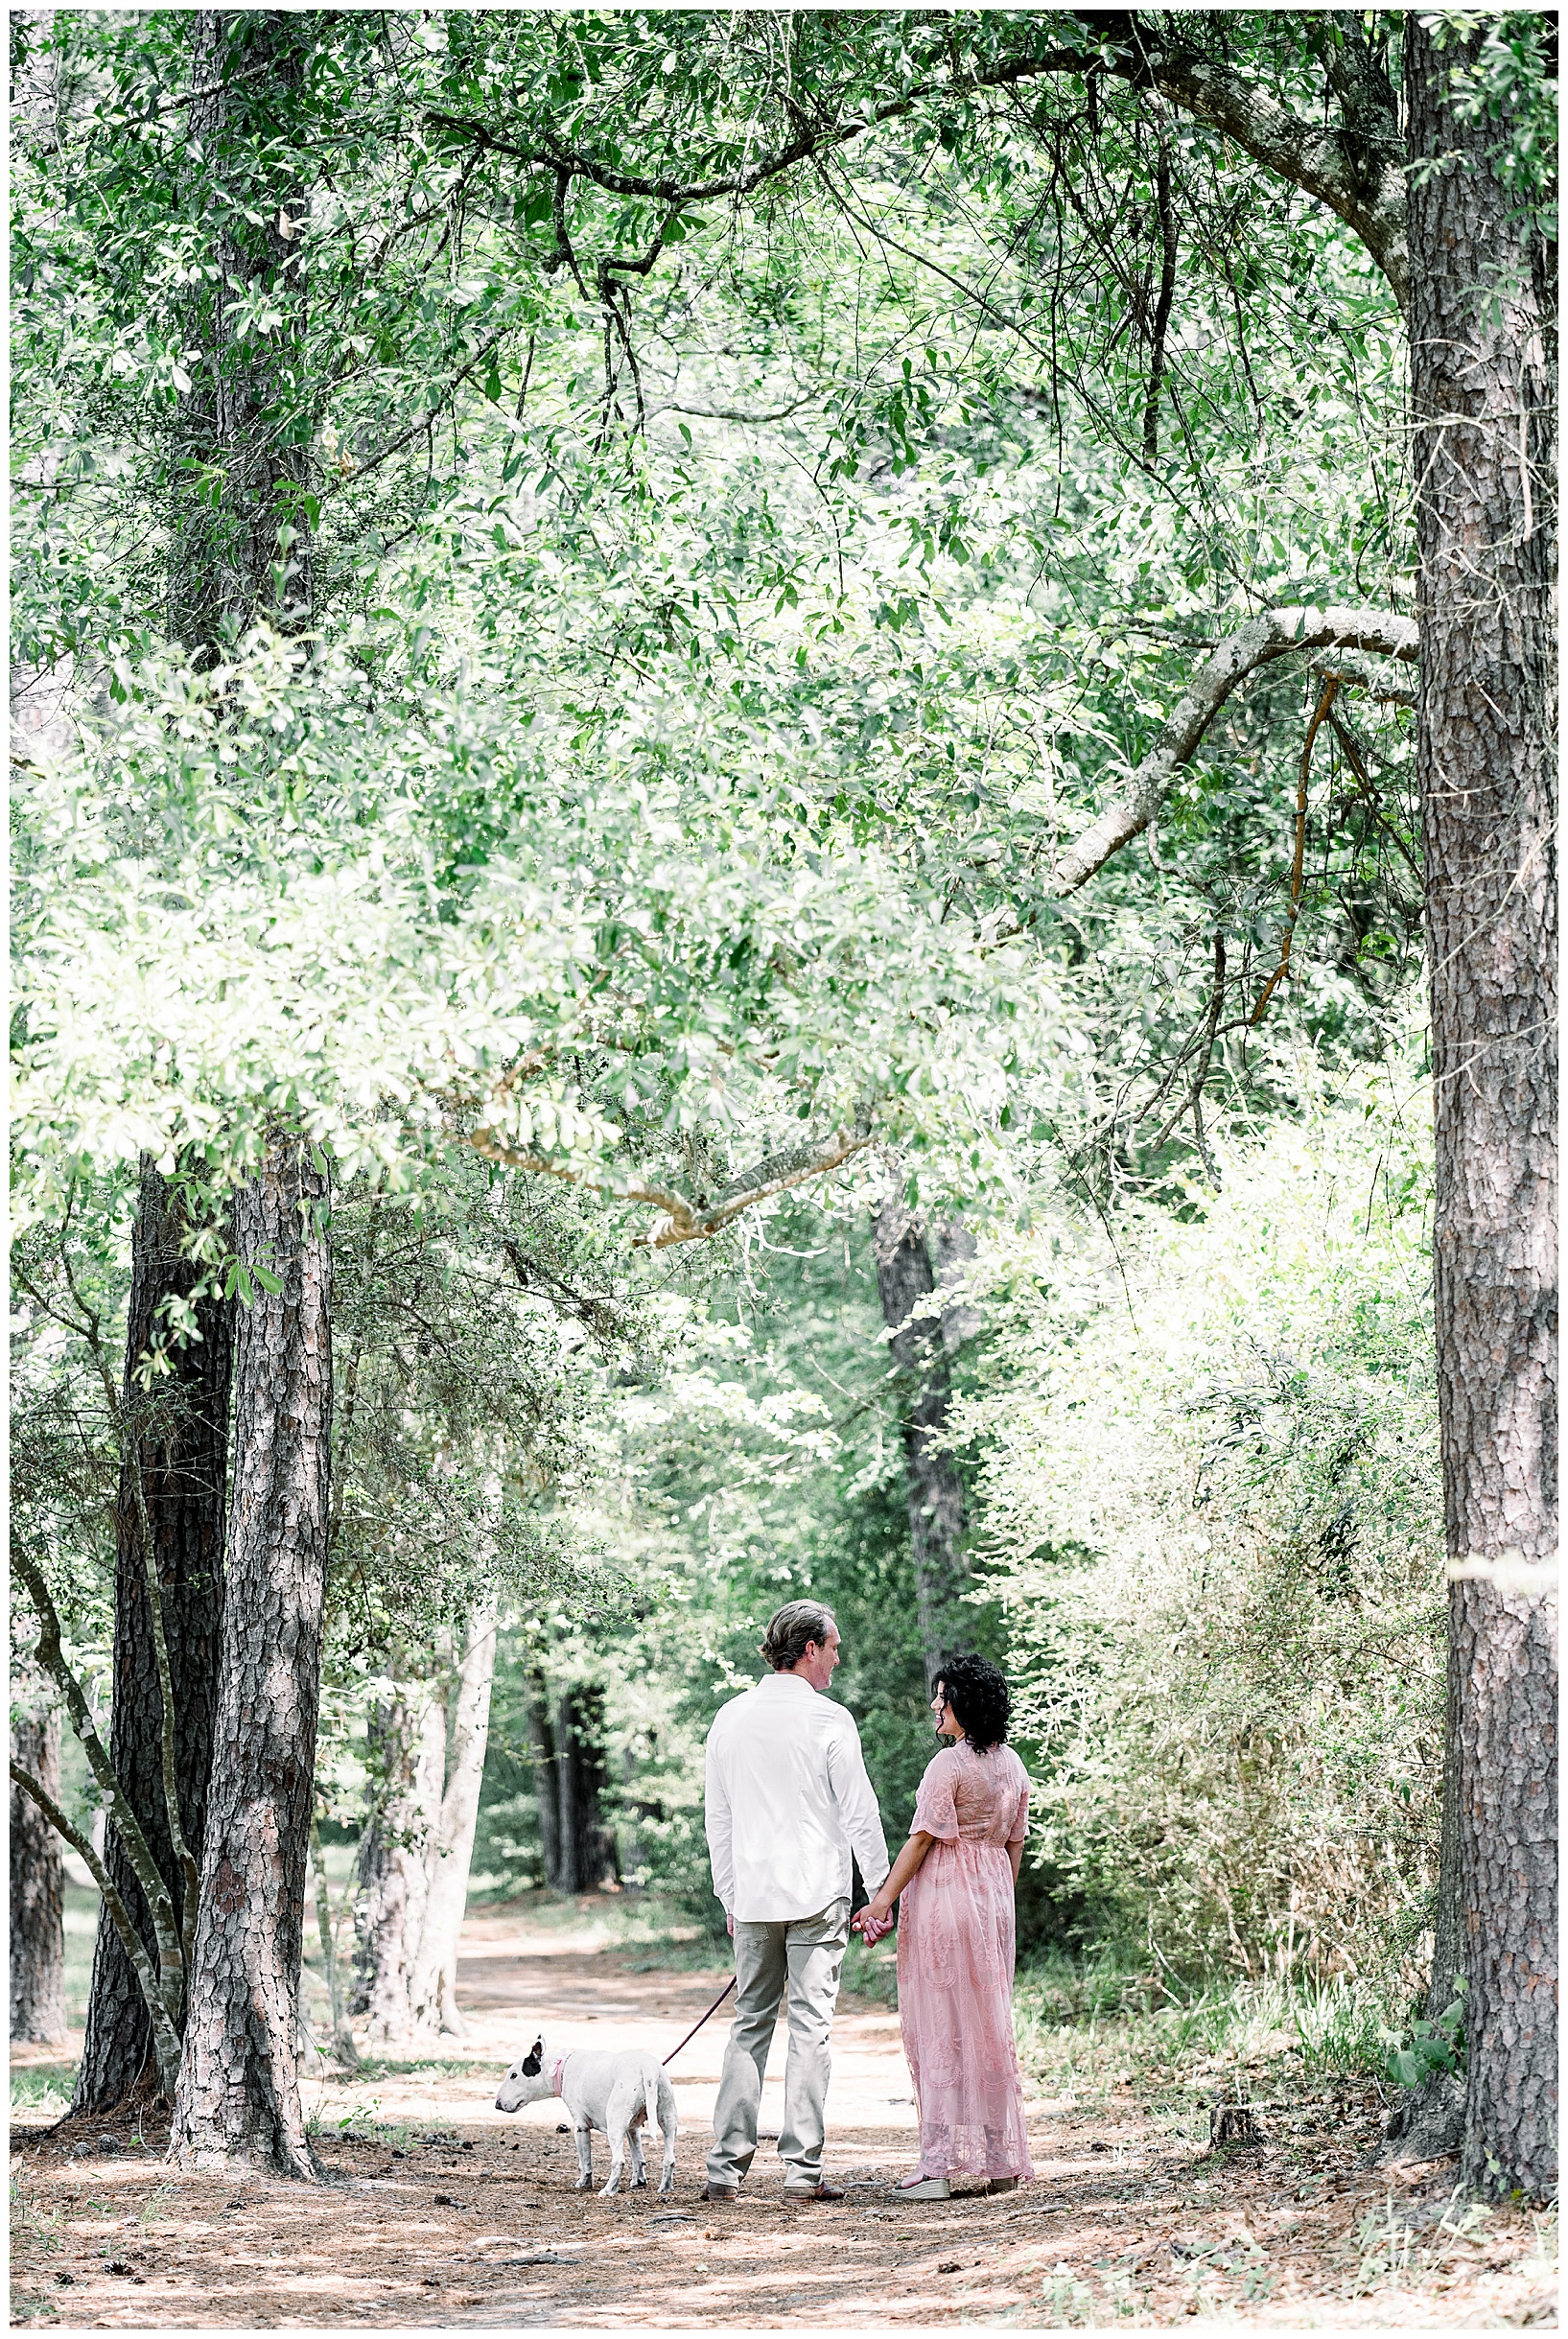 Couple walking under trees in Conroe Texas during maternity photography session